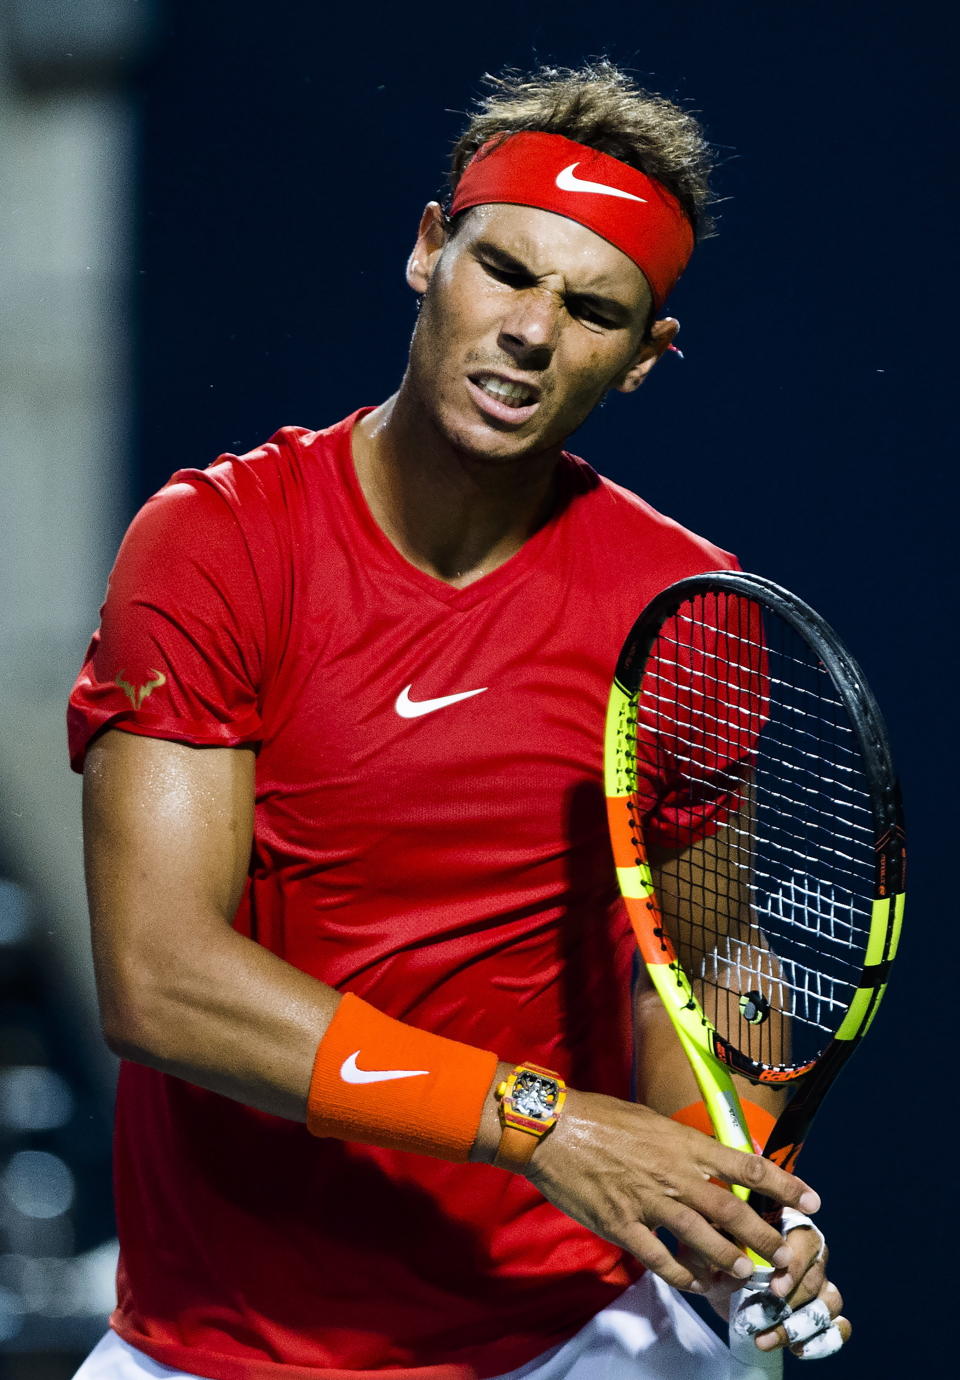 Rafael Nadal, of Spain, reacts during his match against Marin Cilic, of Croatia, during the Rogers Cup men’s tennis tournament in Toronto, Friday, Aug. 10, 2018. (Nathan Denette/The Canadian Press via AP)